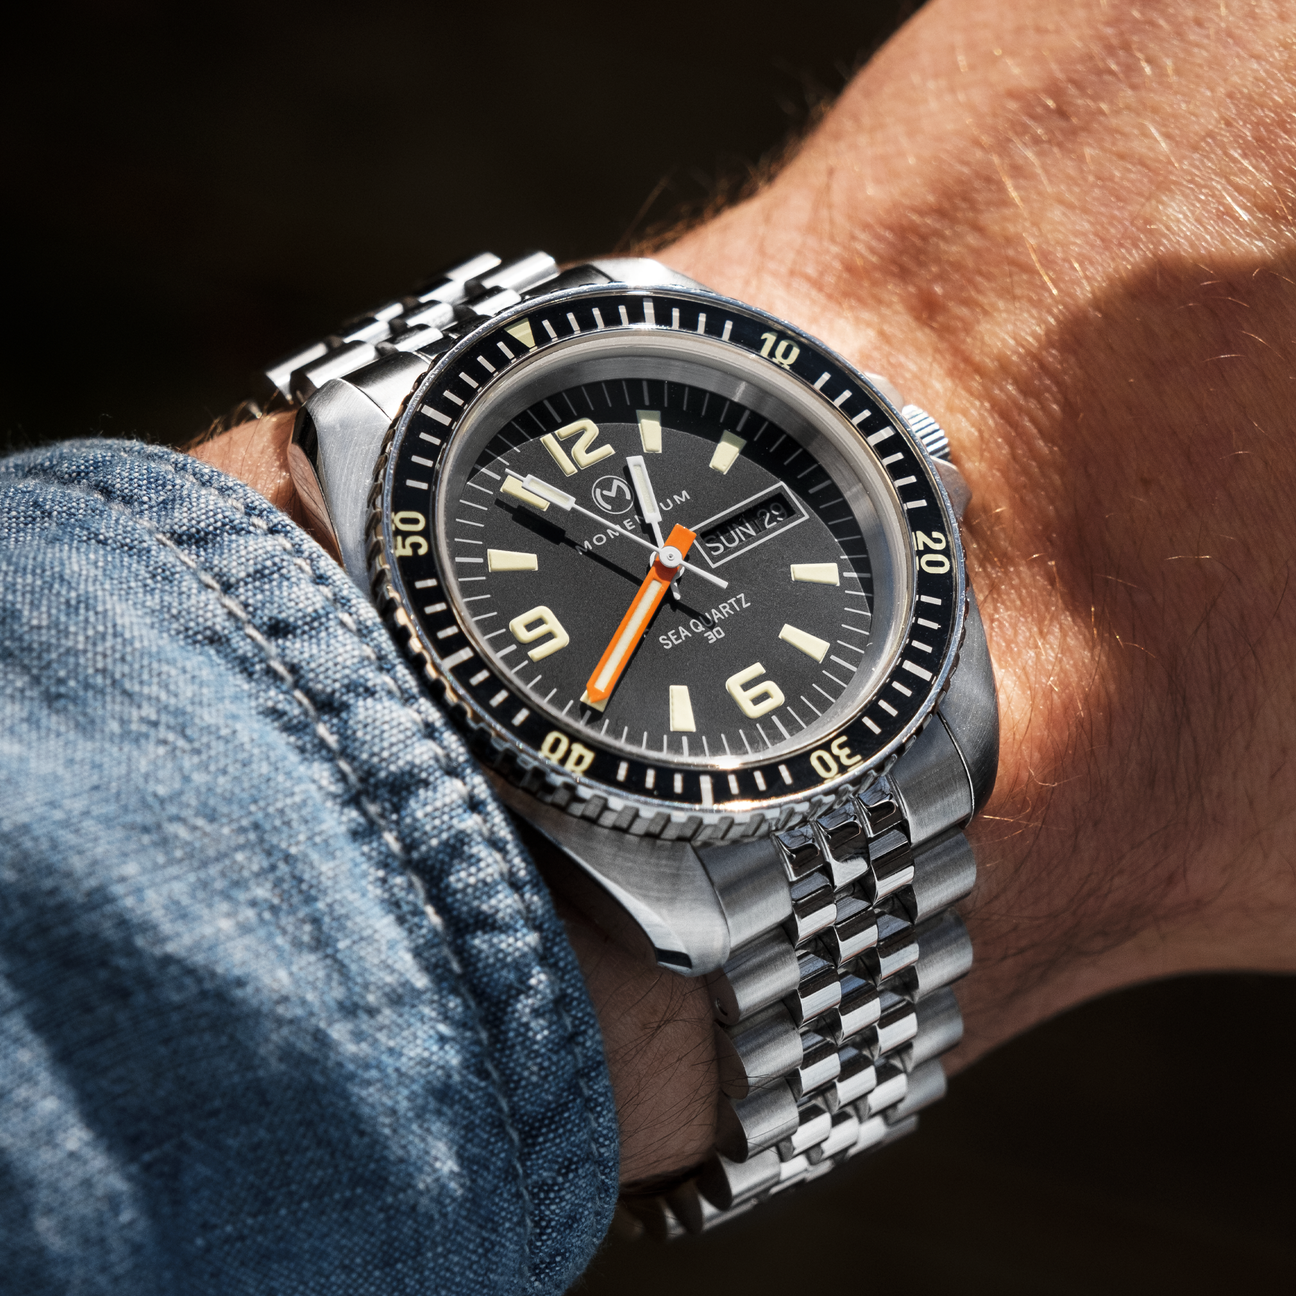 Momentum Watches  A True Northern Watch Company